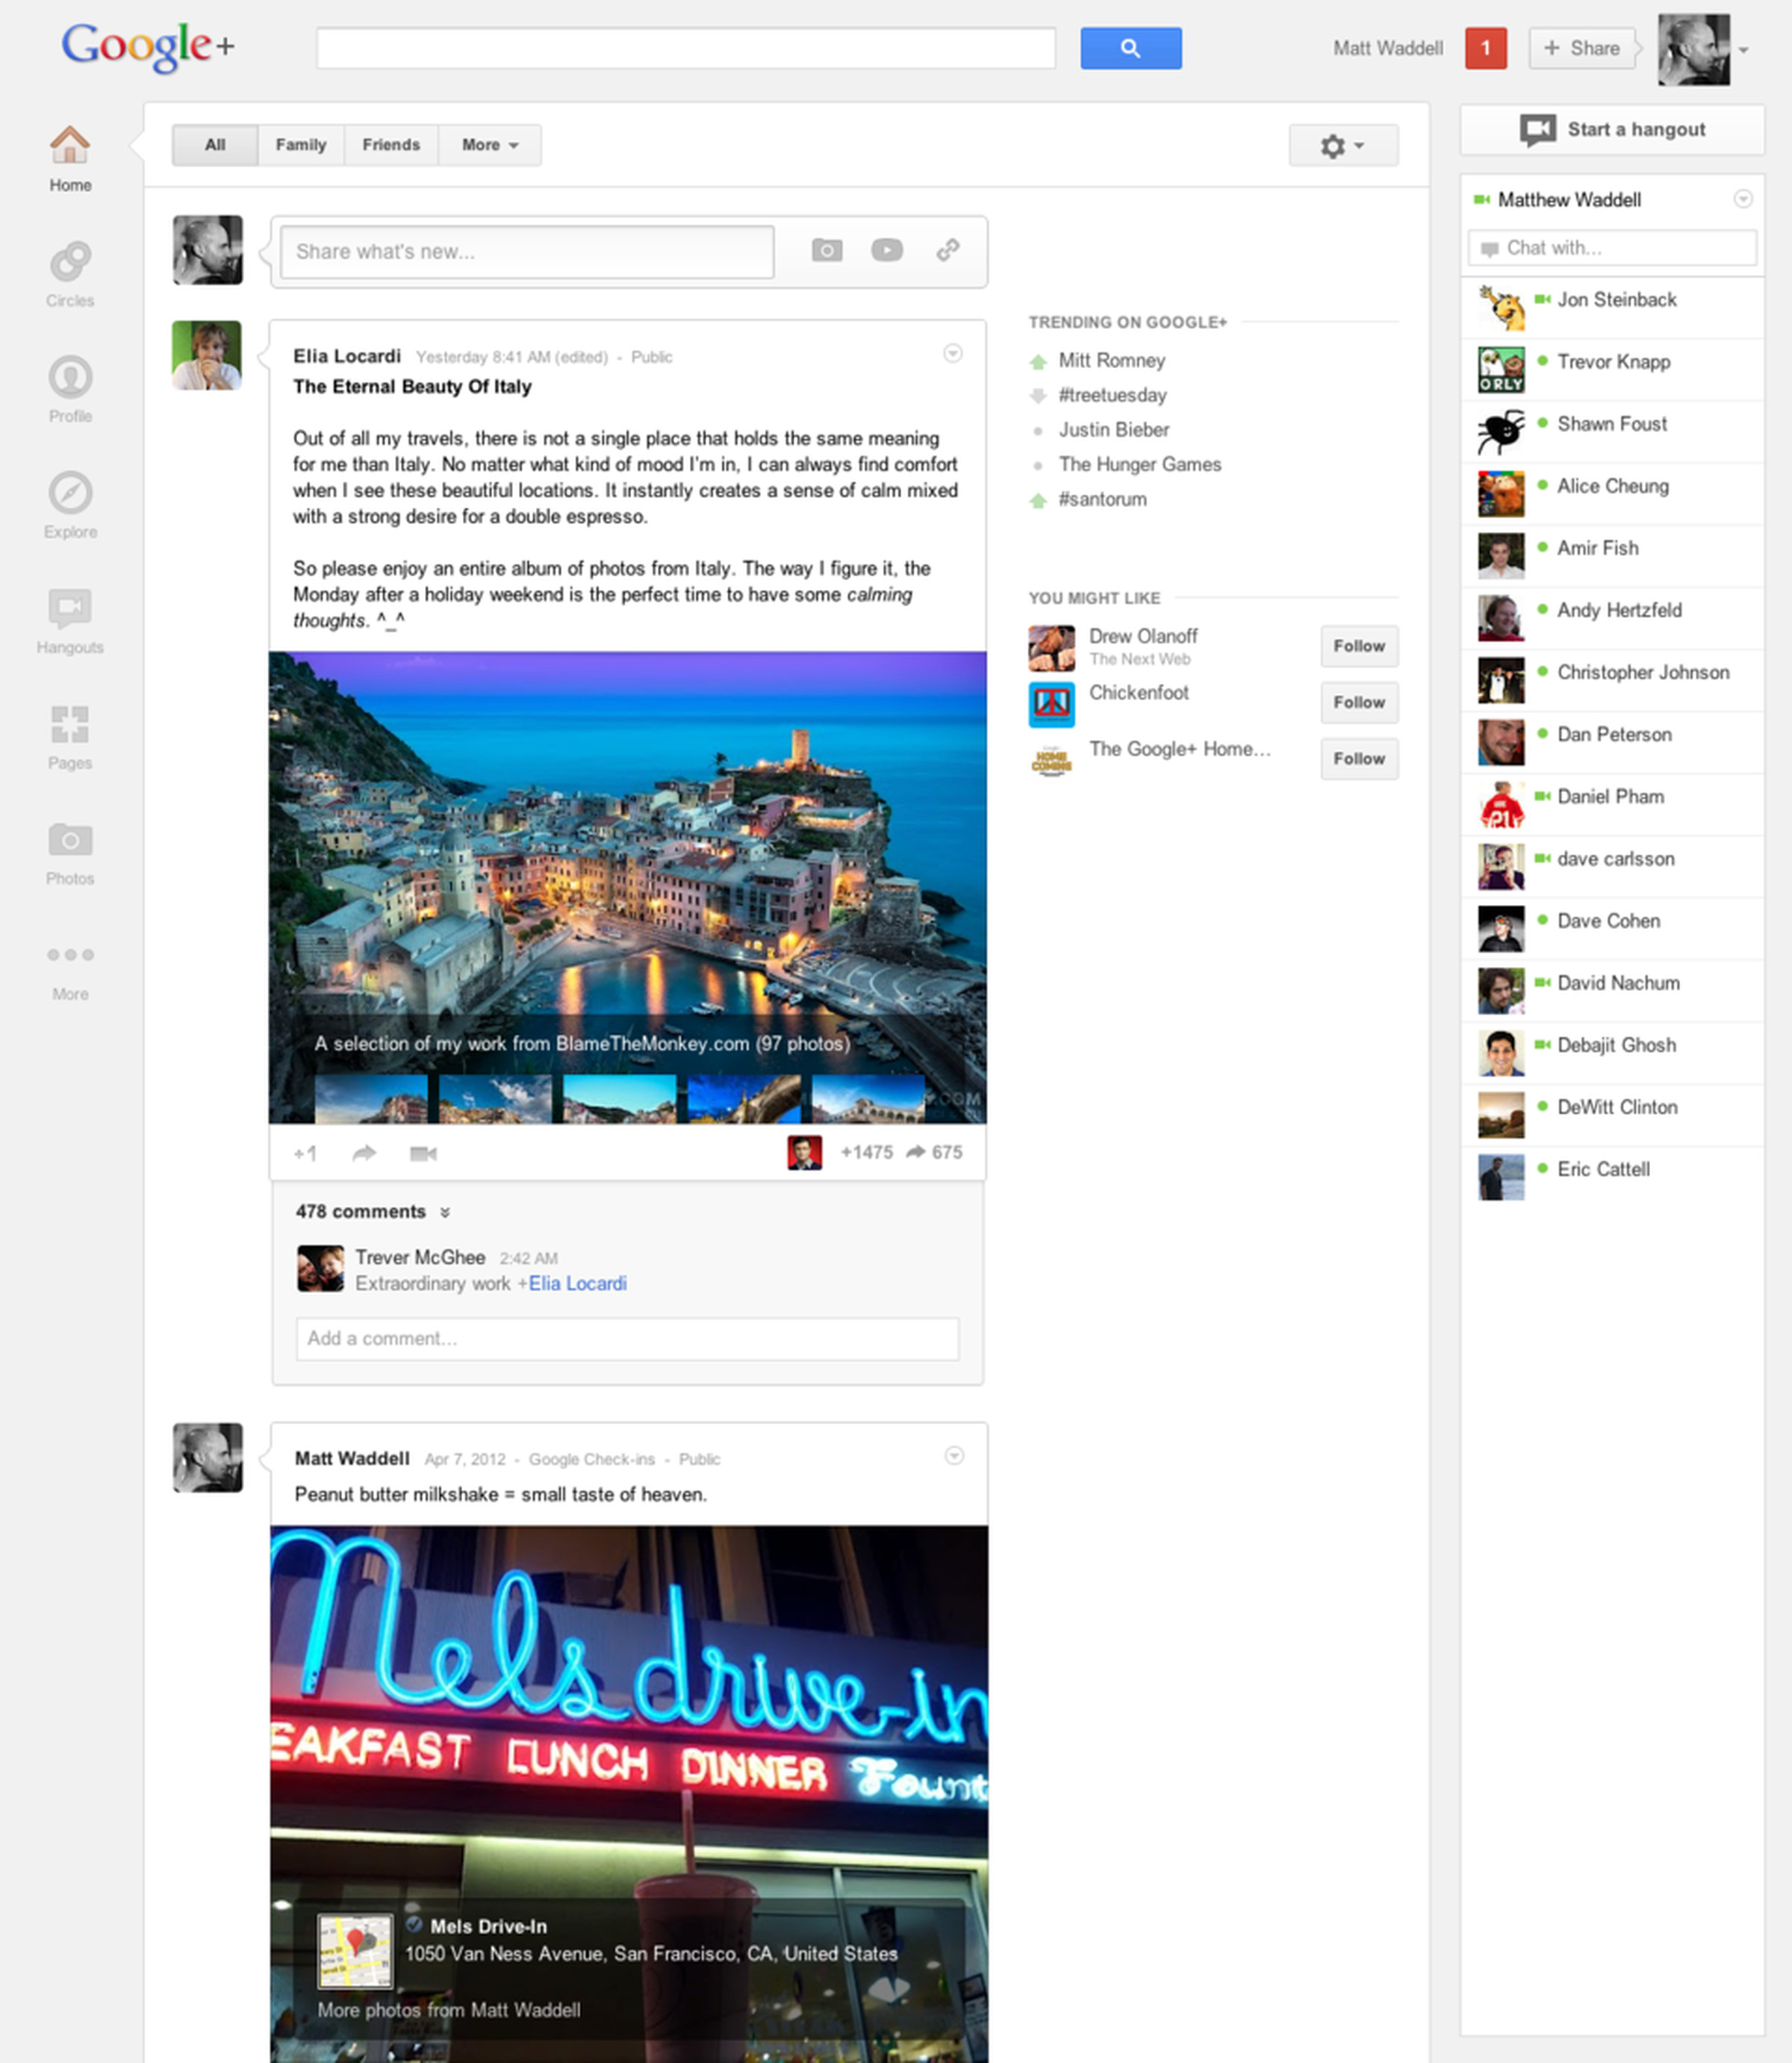 Google+ redesign pictures